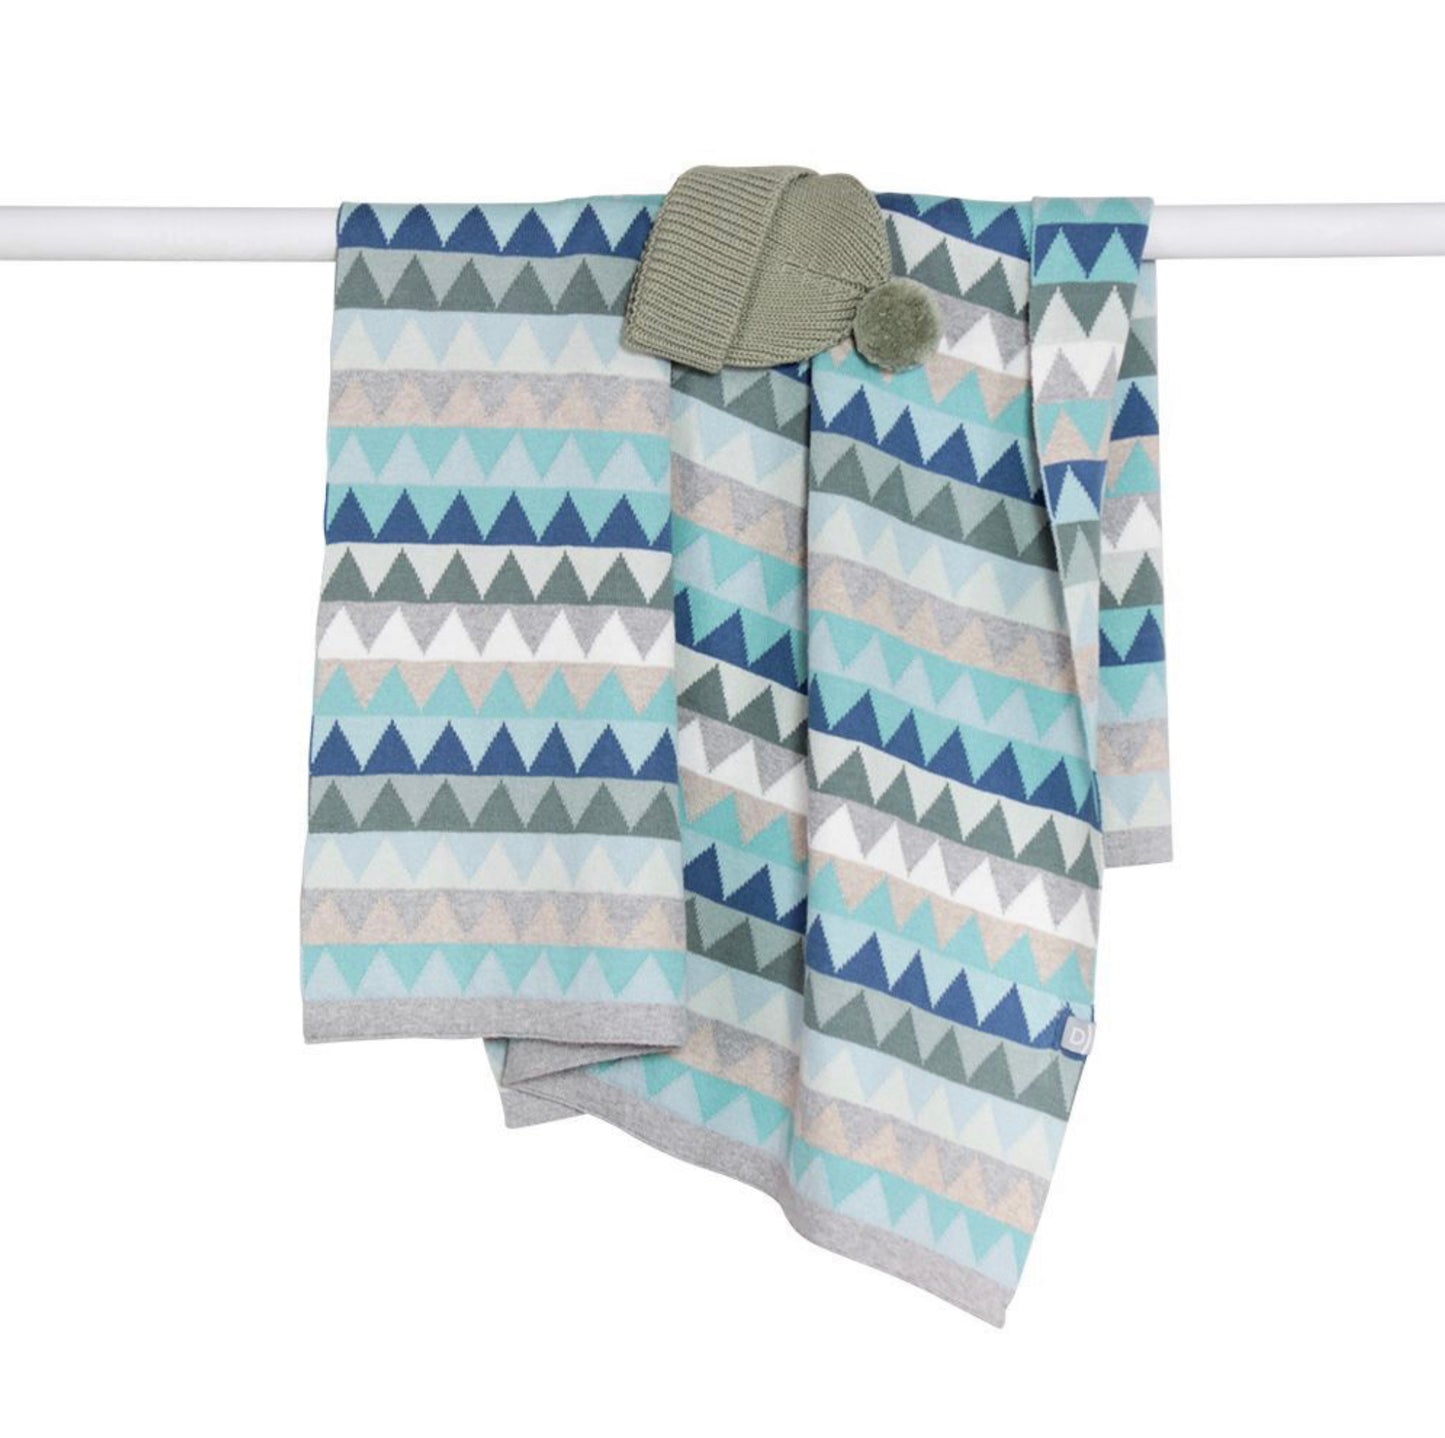 D)Lux Archie Triangles Baby Blanket